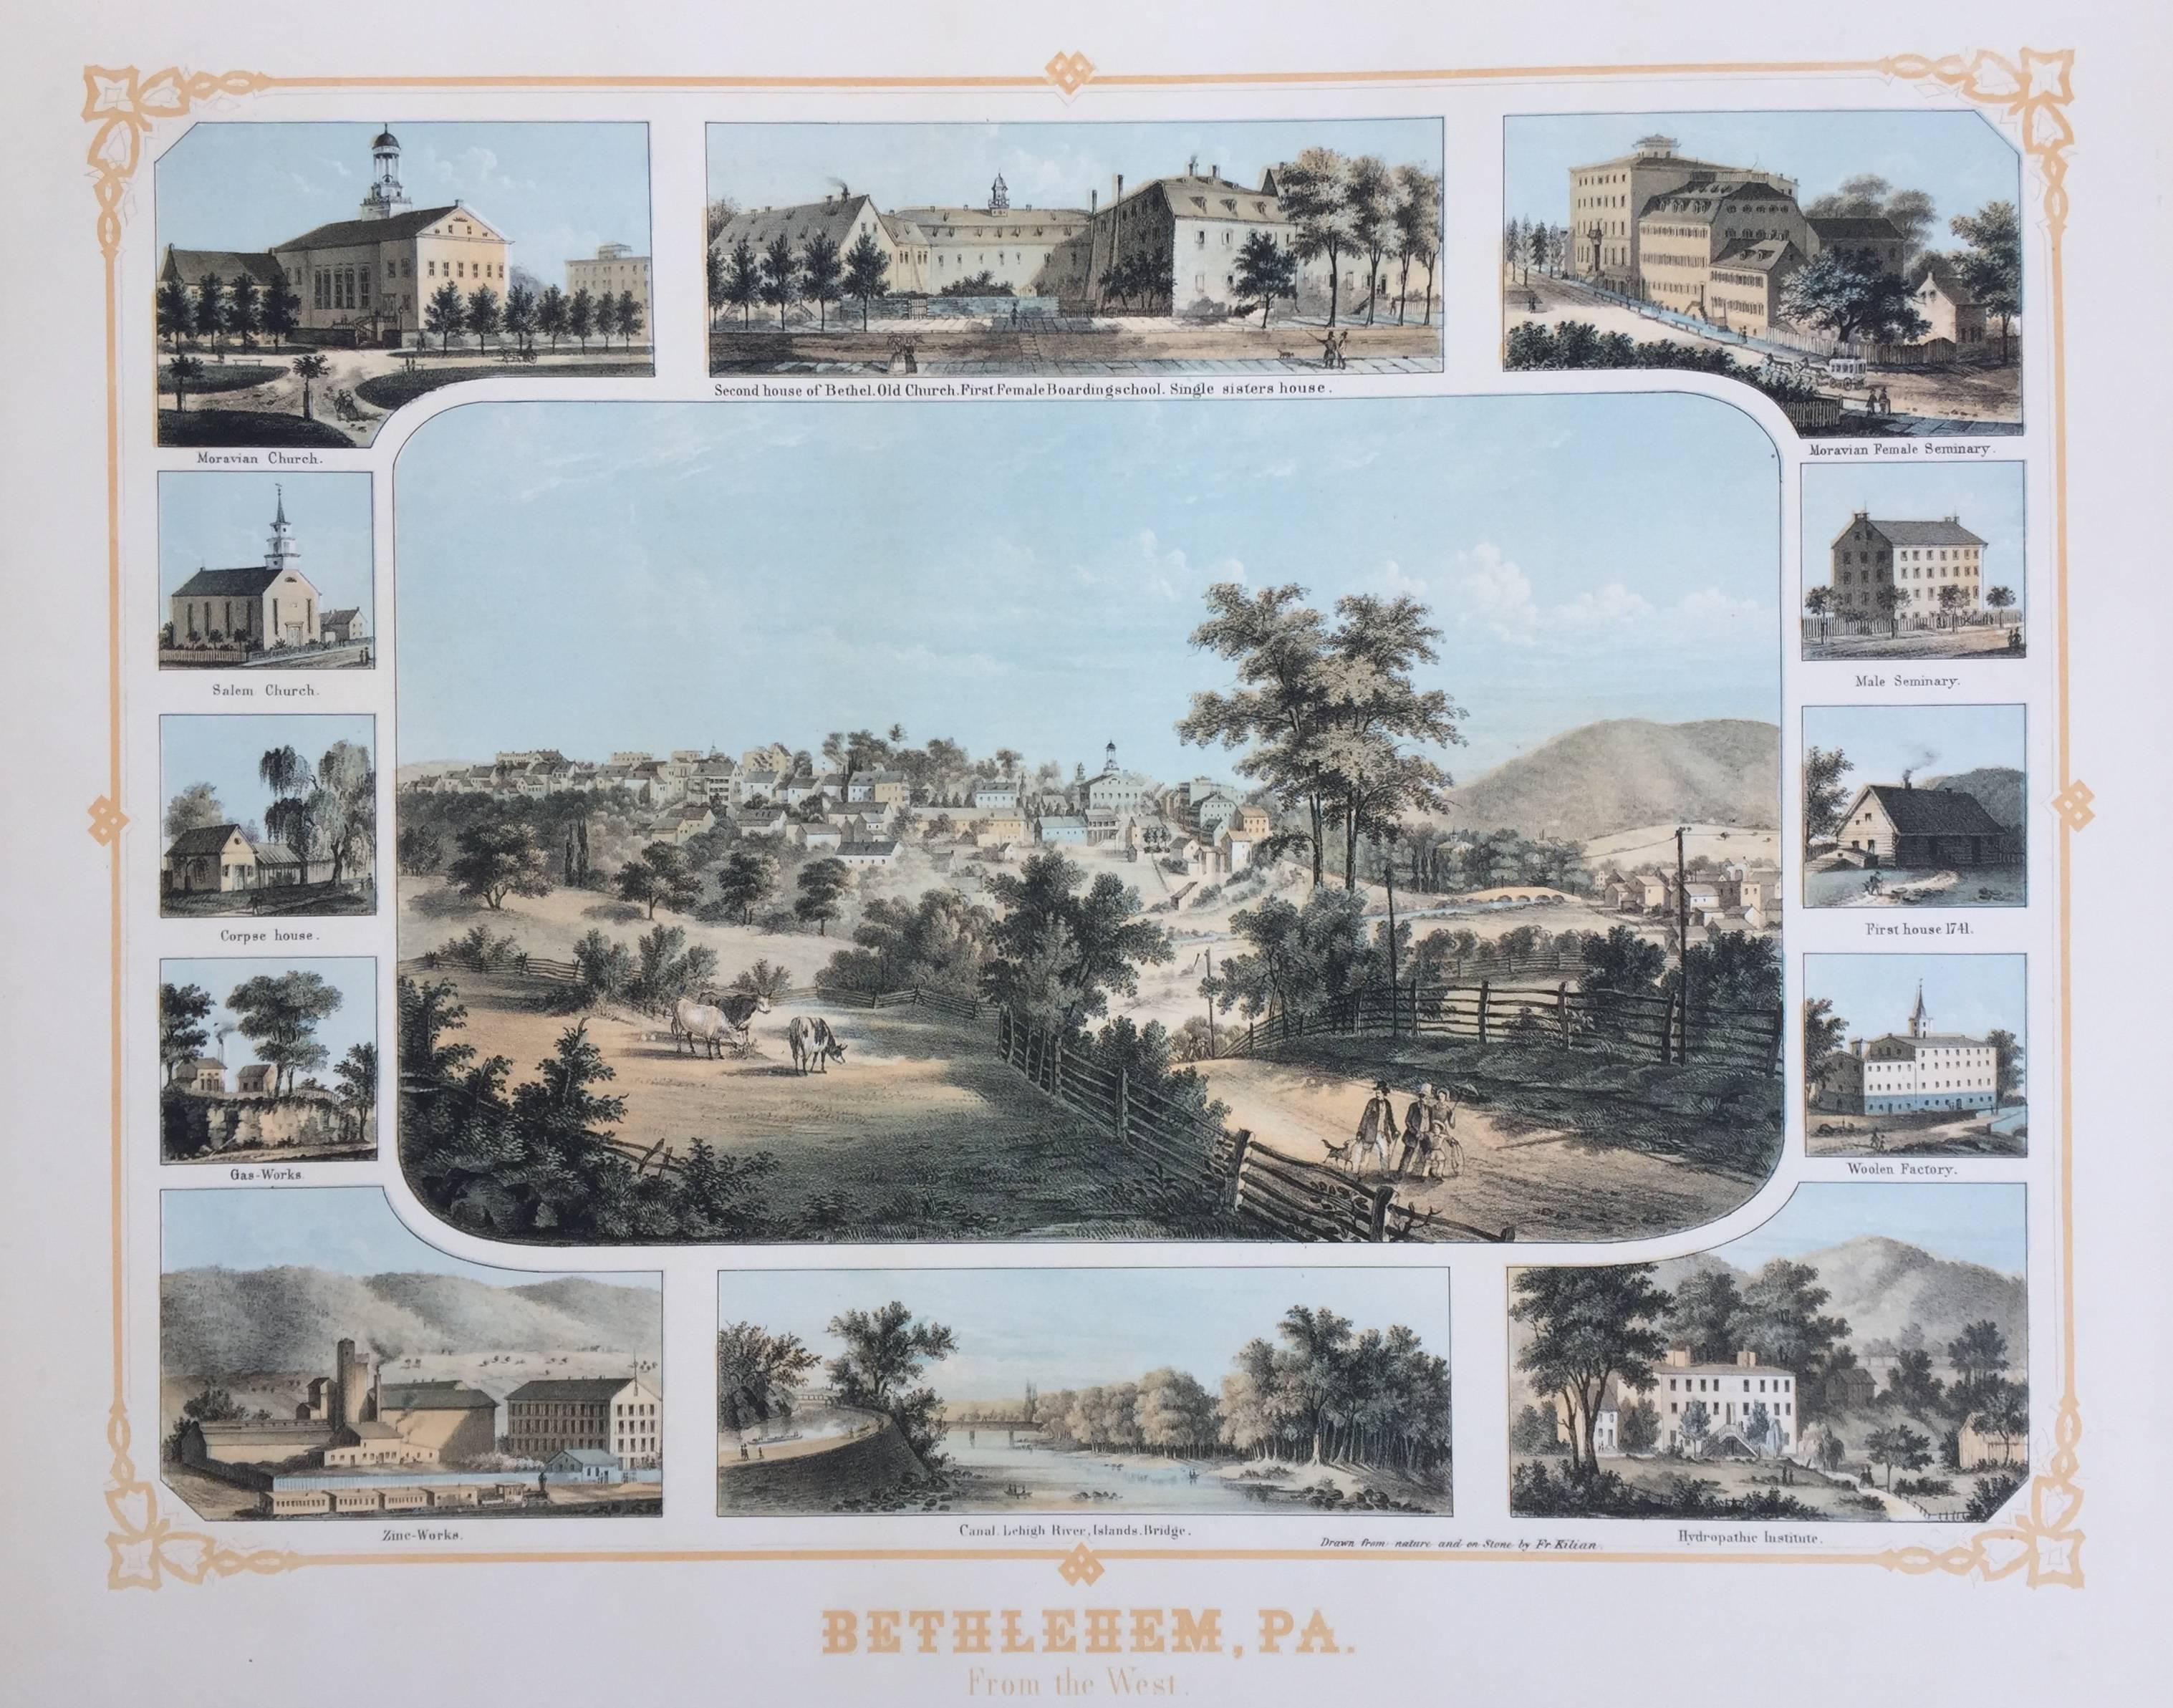 Unknown Landscape Print - Birds-eye view  -  BETHLEHEM, PA - From the West